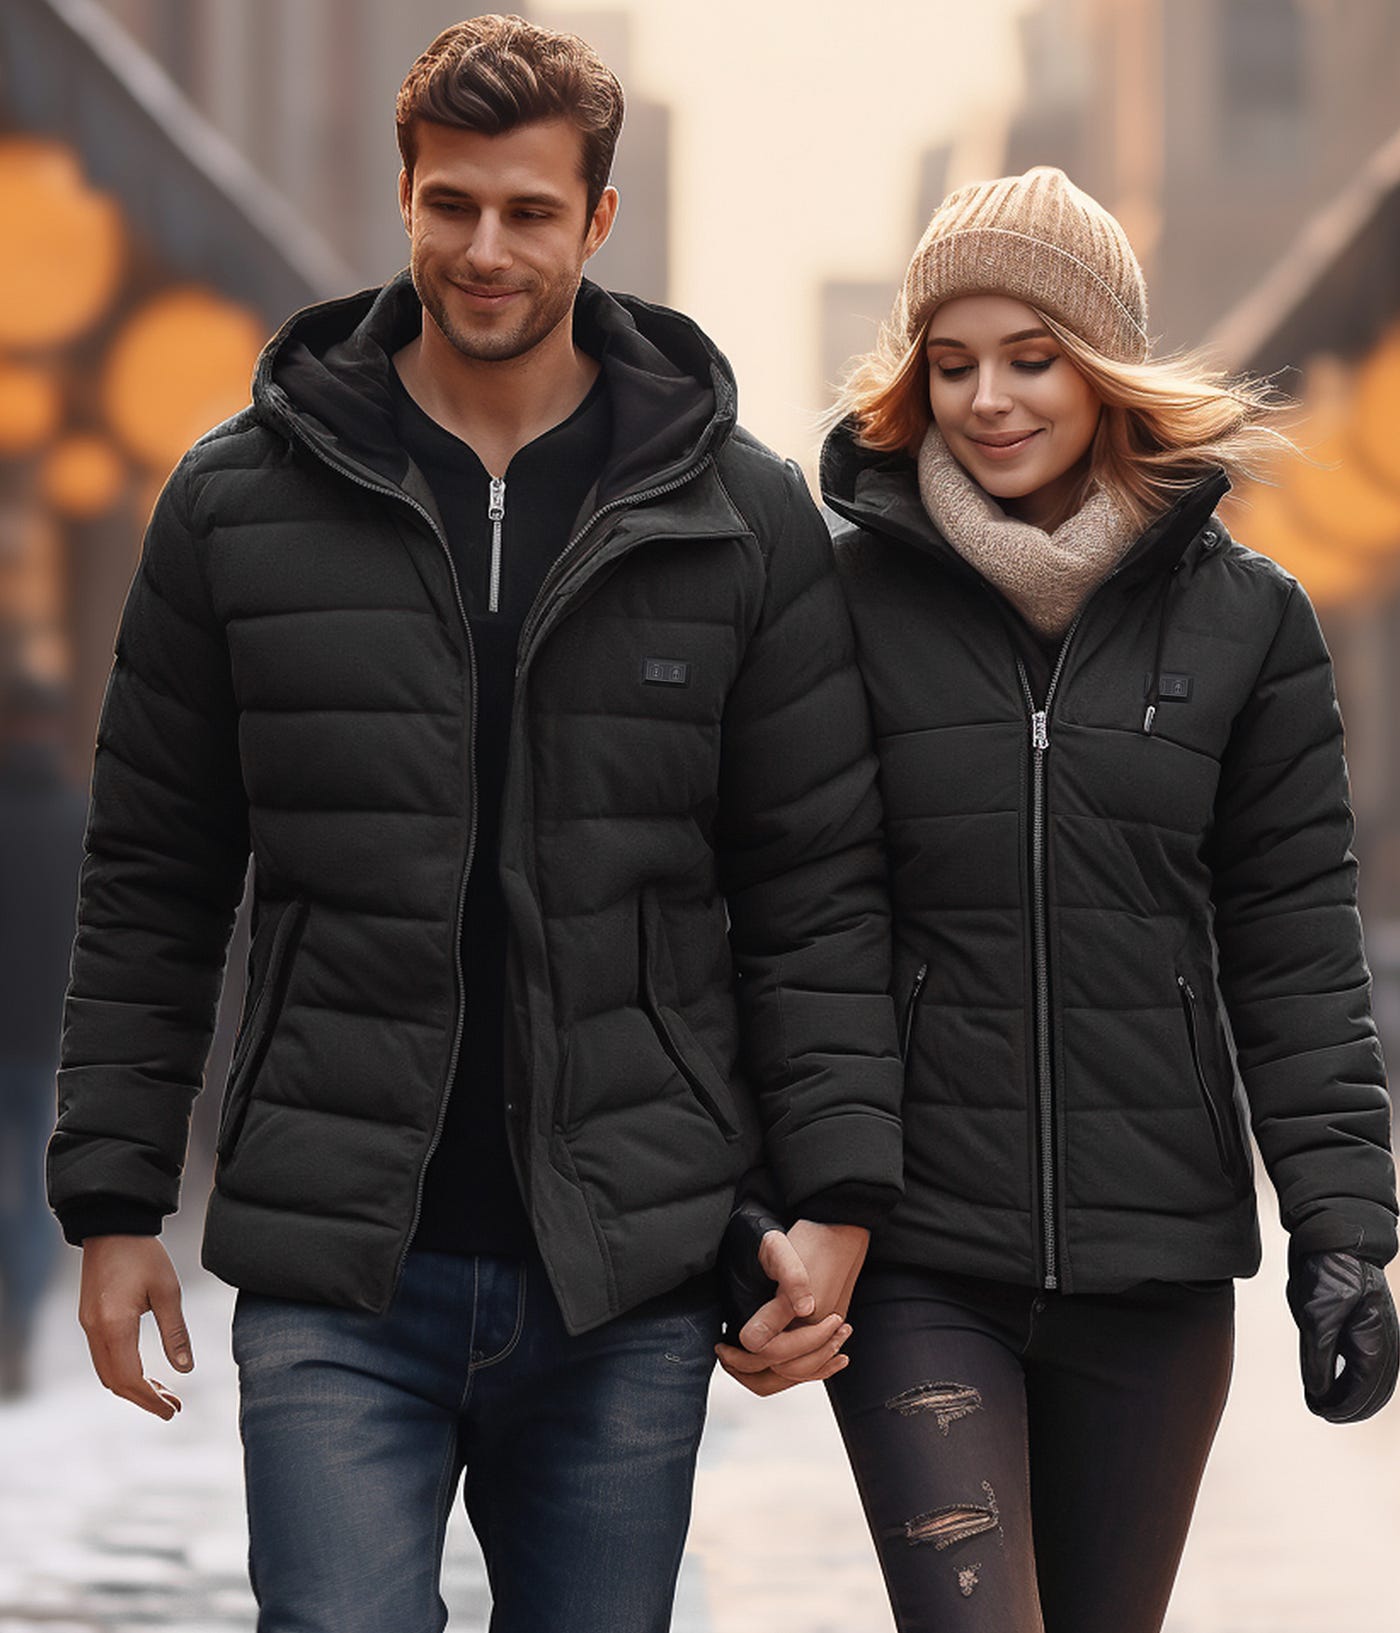 10 Reasons Why a Heated Jacket is a Must-Have for Outdoor